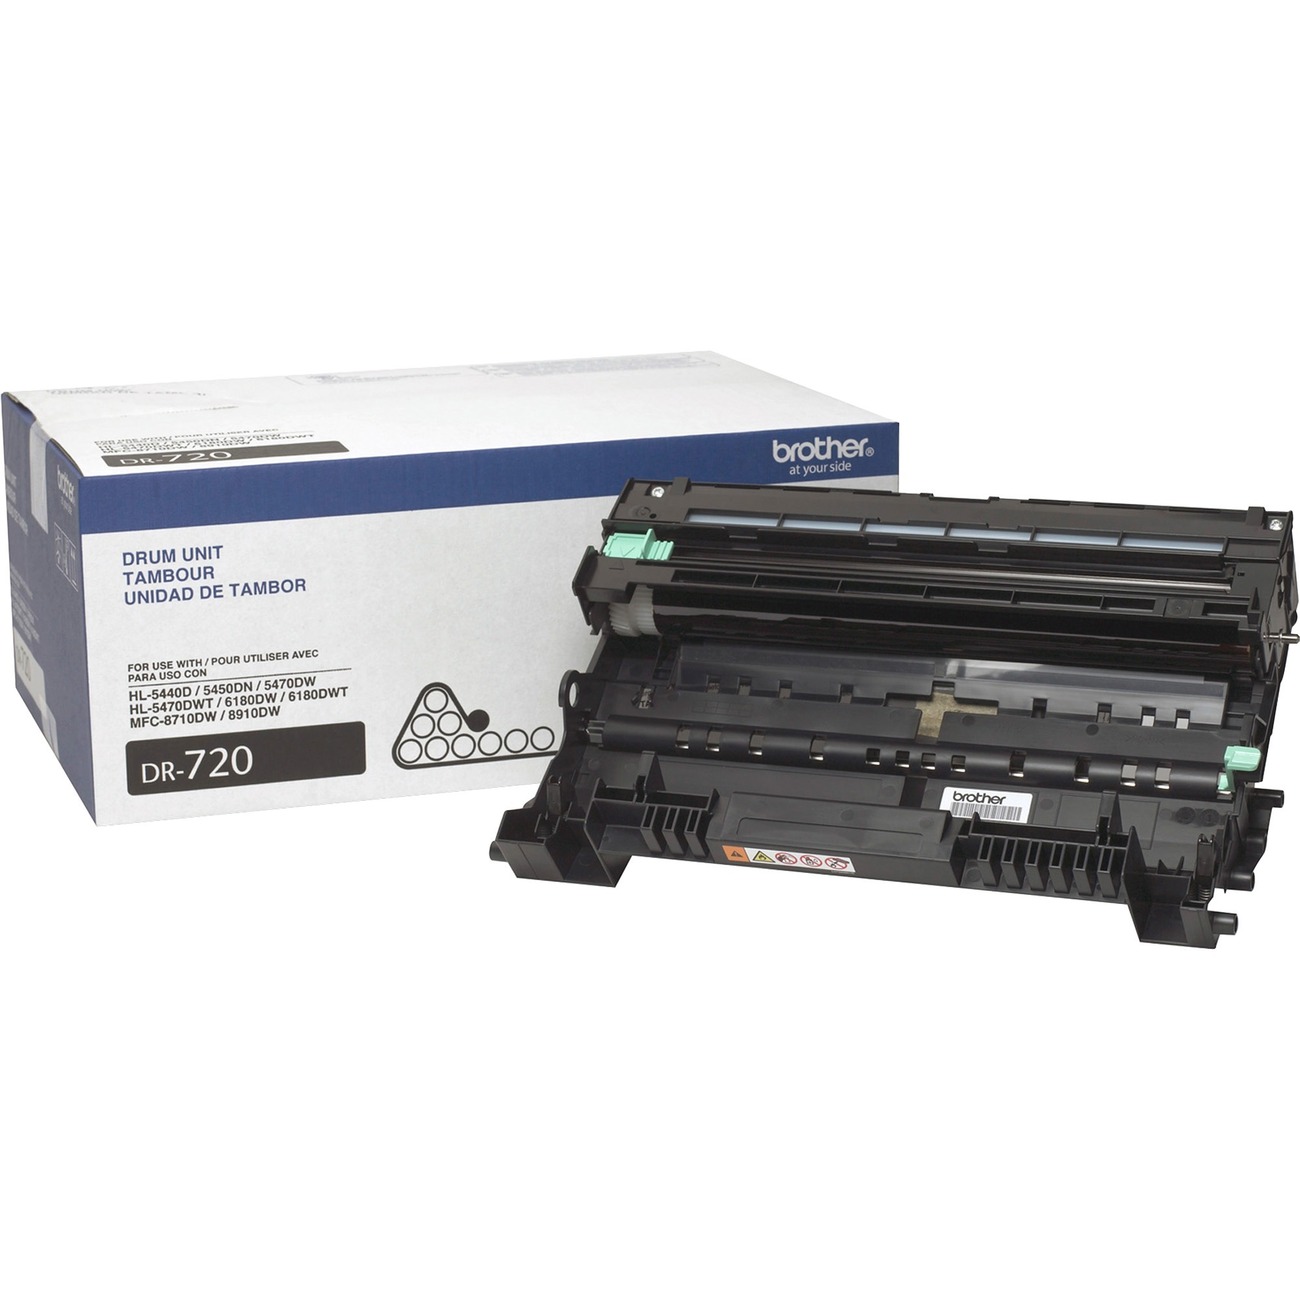 Kamloops Systems :: Technology :: Printers, Multifunction, & Printing Supplies :: Laser Printer Supplies :: Laser Printer Drums :: Brother DR72 Laser Printer Drum - Laser Print Technology 30000 - 1 Each